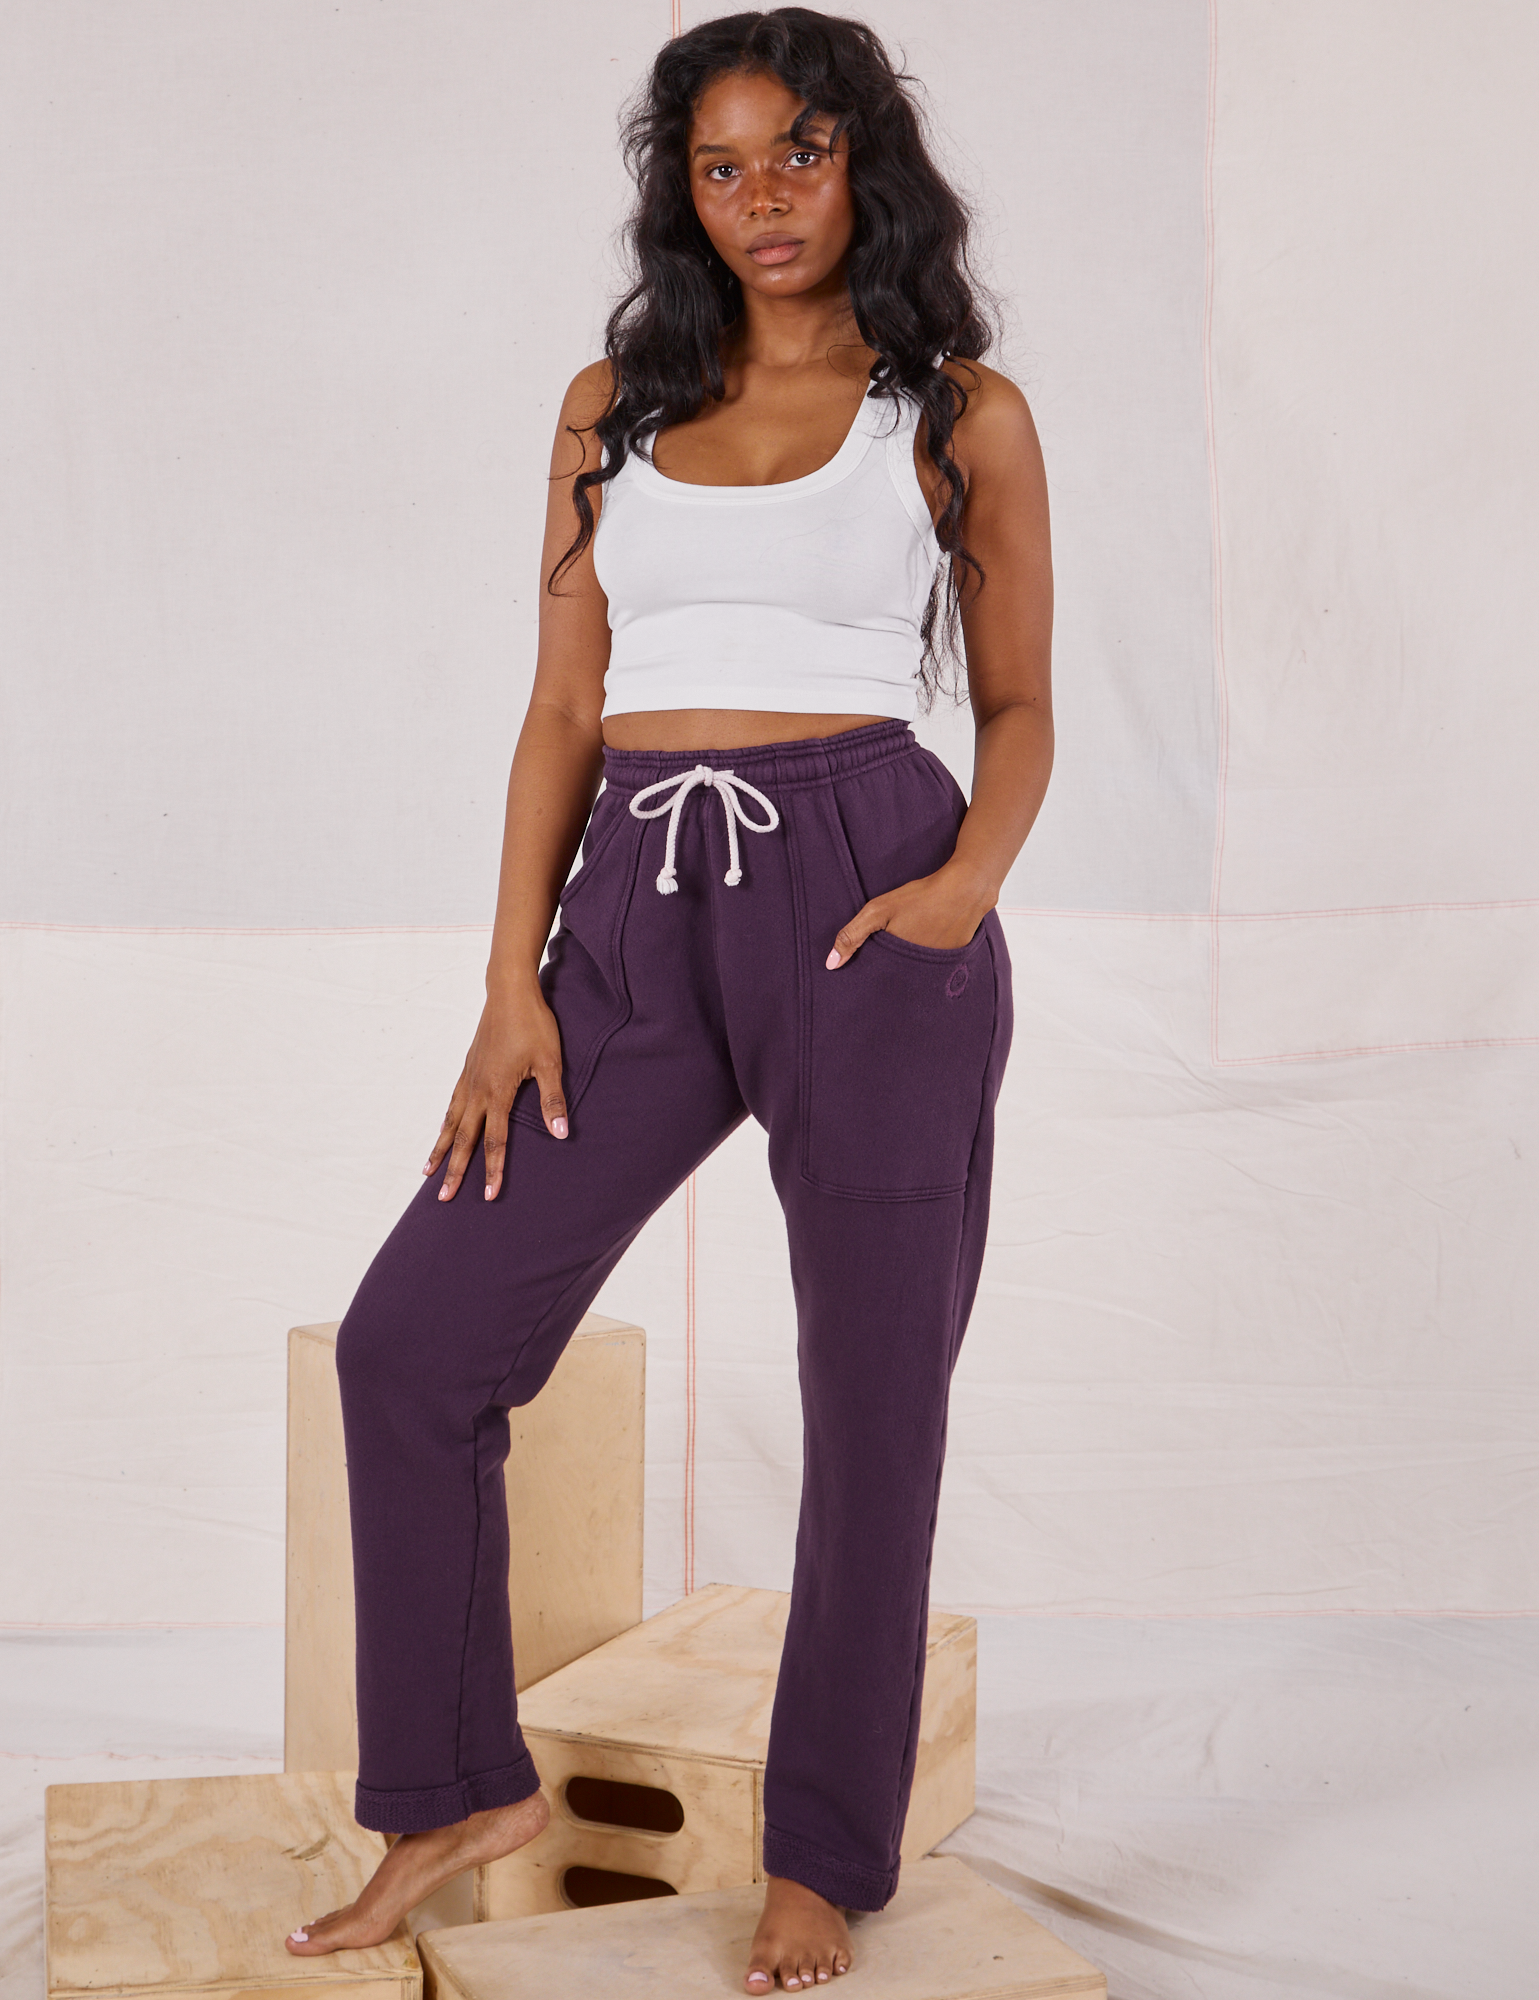 Kandia is wearing Rolled Cuff Sweat Pants in Nebula Purple and a vintage off-white Cropped Tank Top